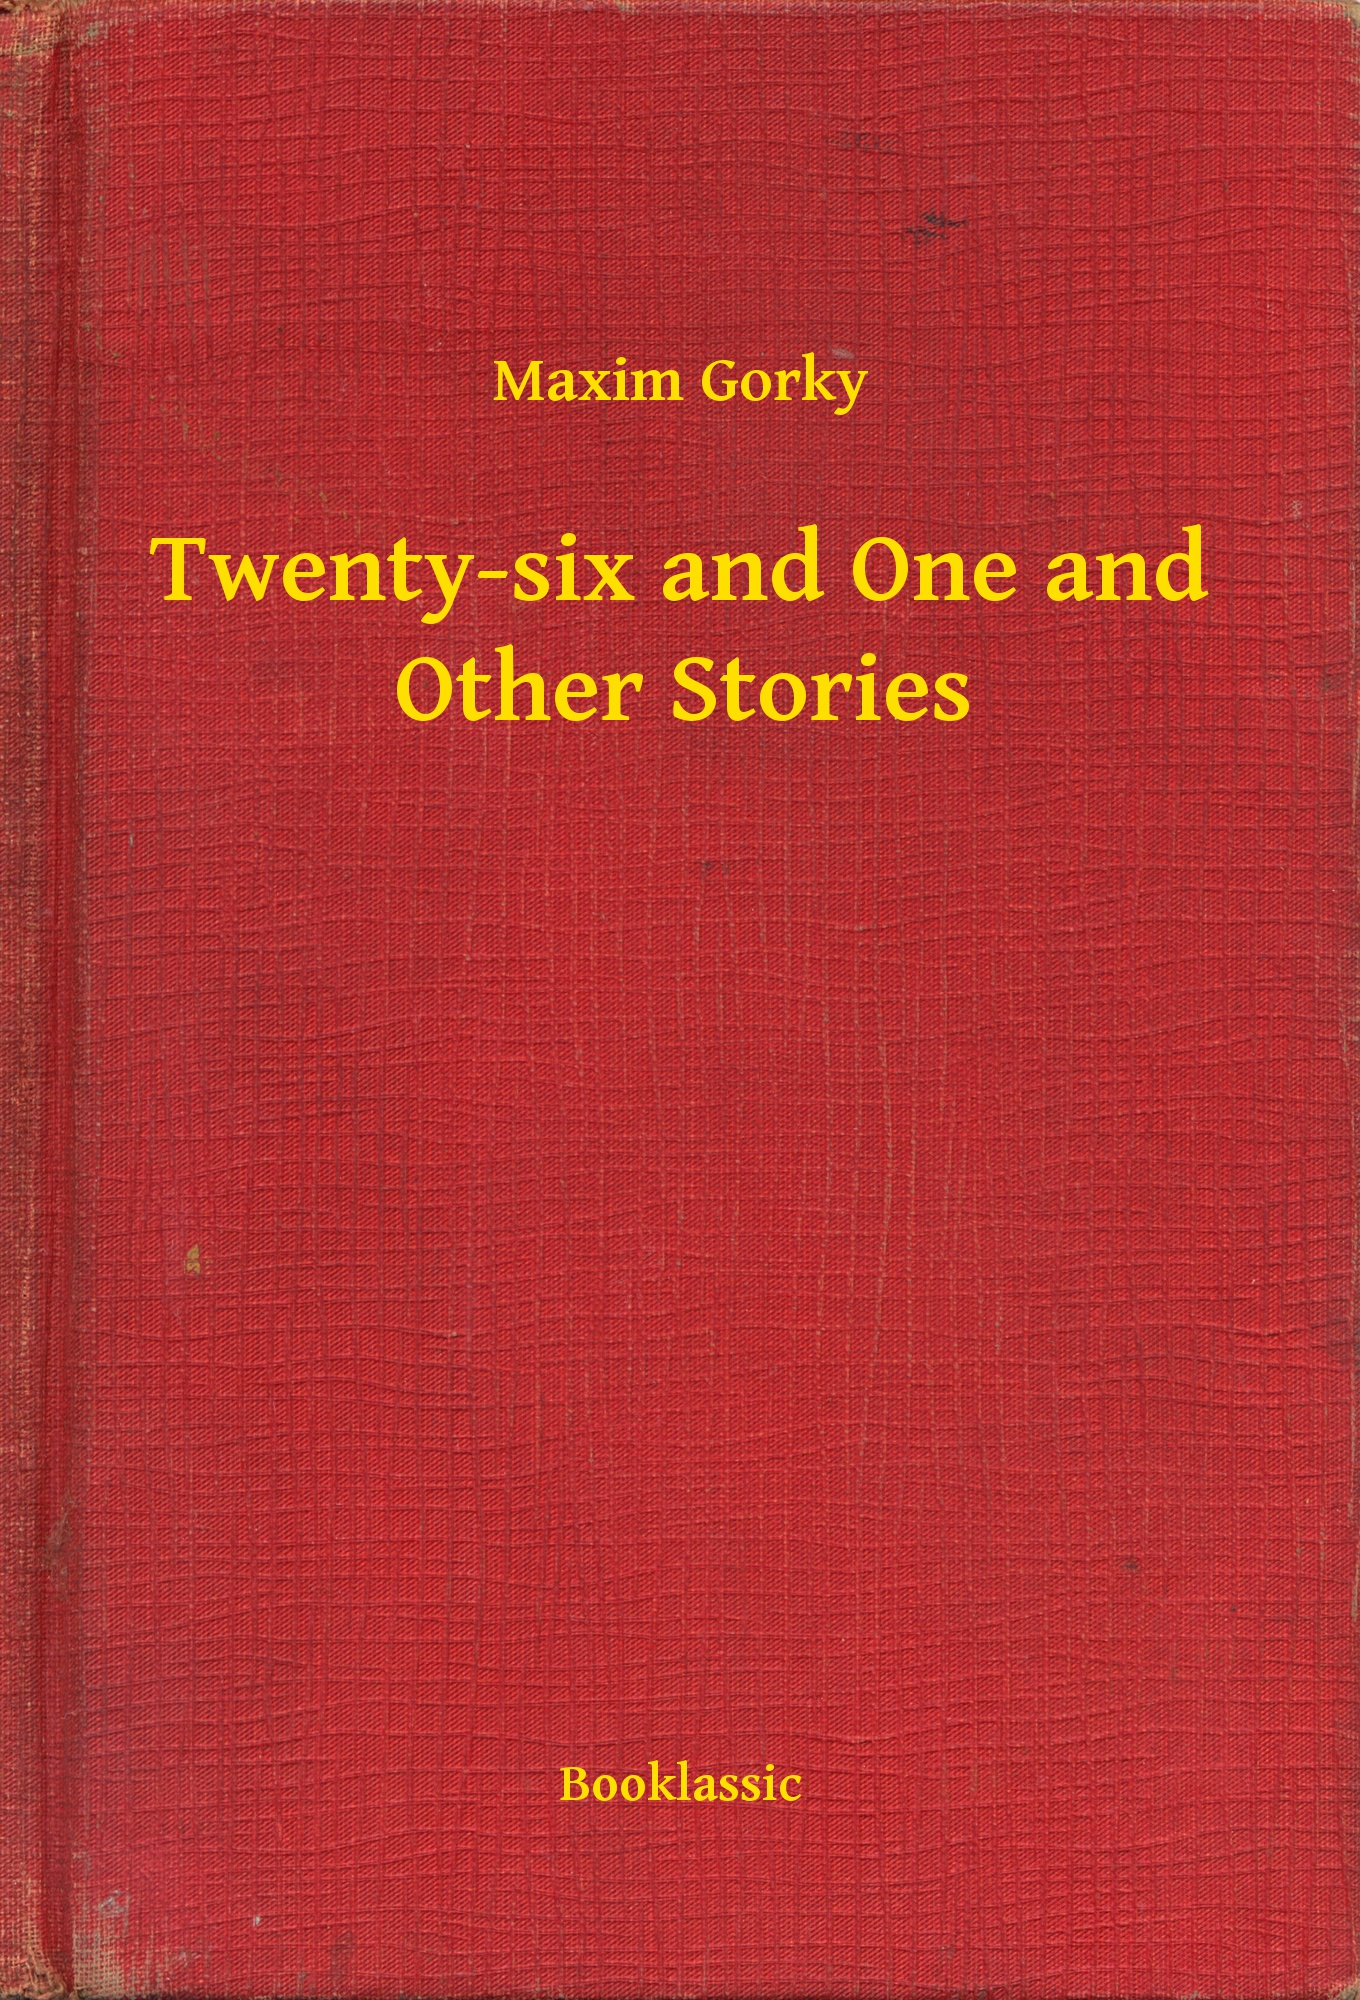 Twenty-six and One and Other Stories